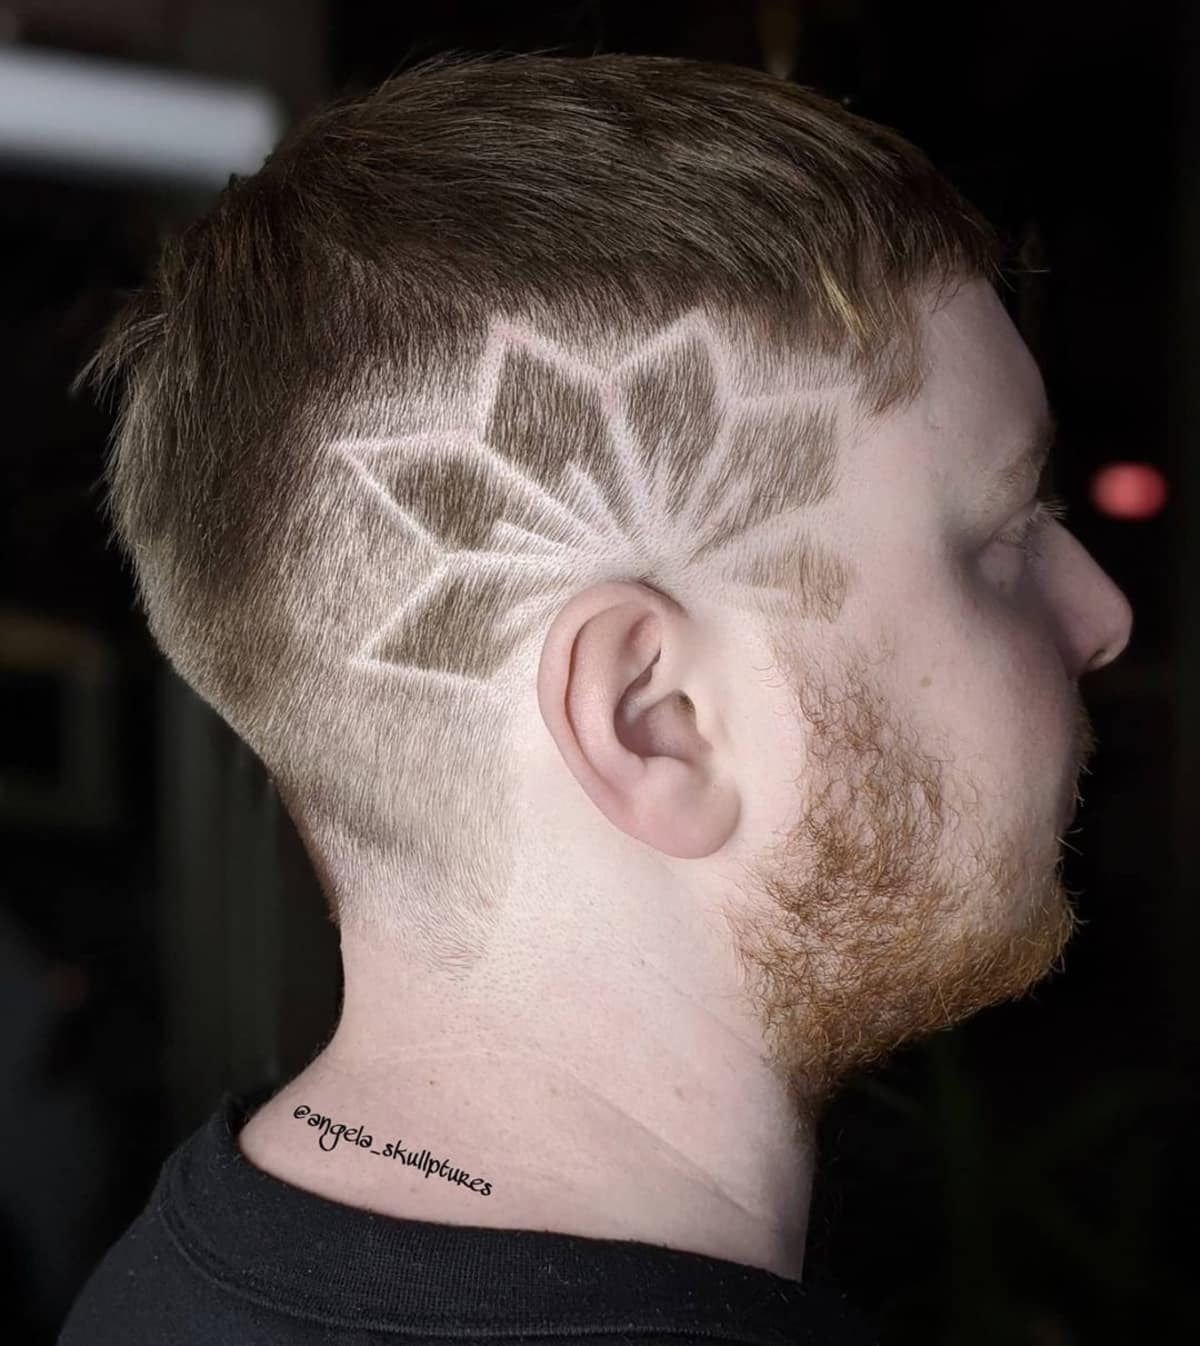 The 17 Coolest Hair Designs for Men This Year